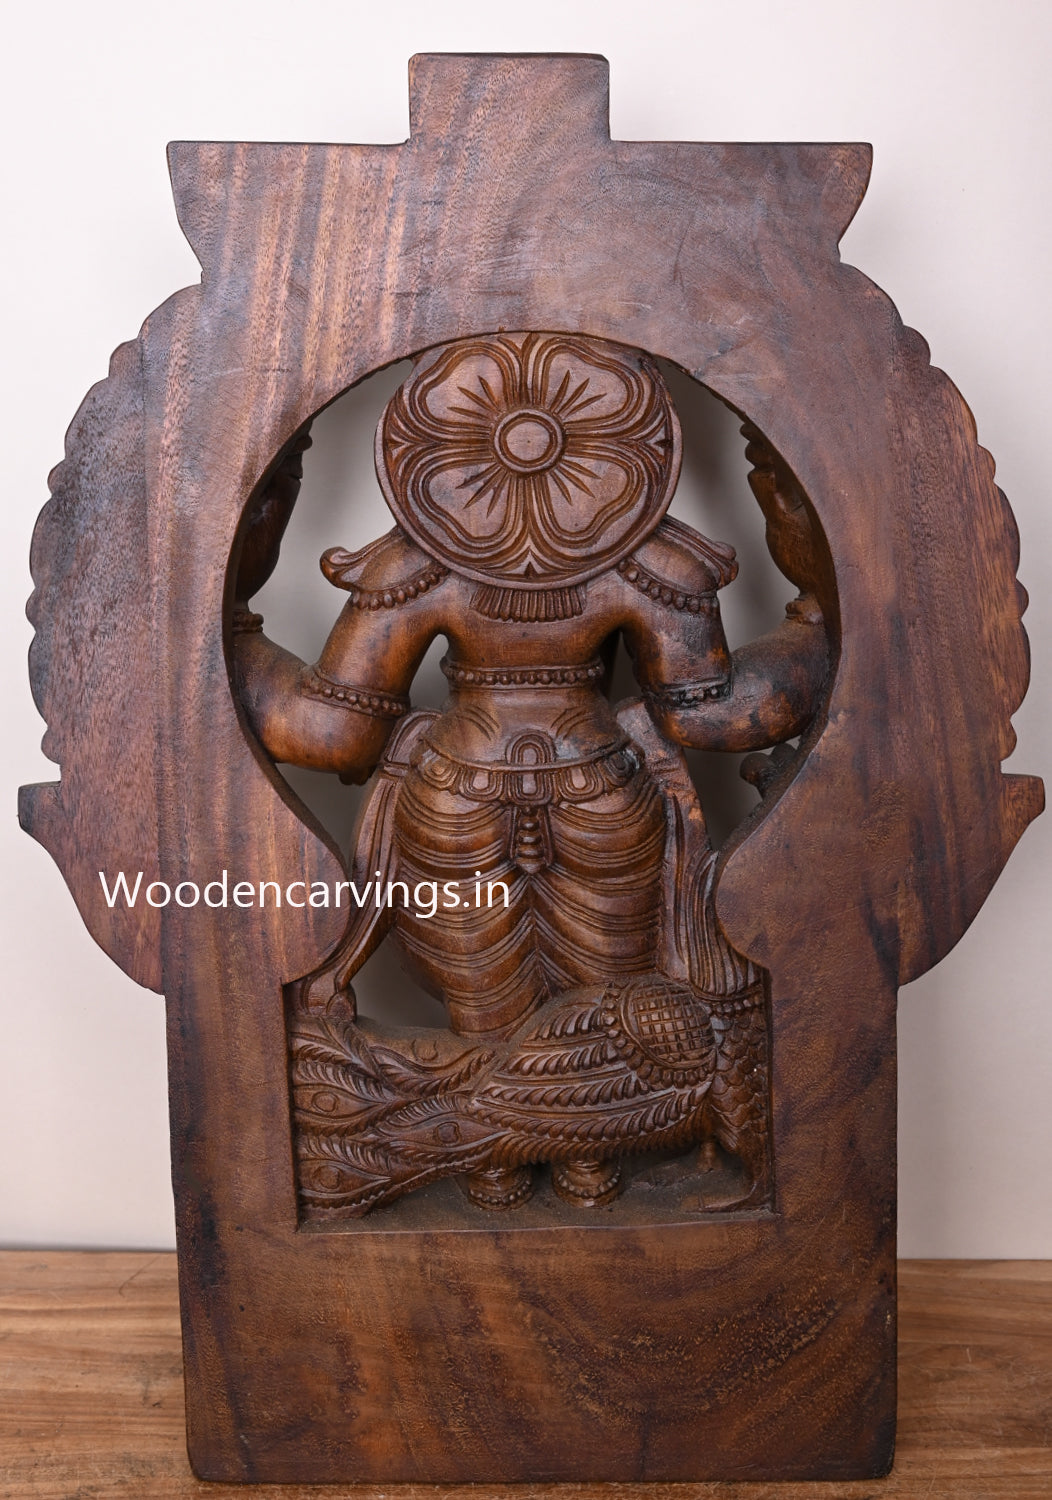 Arch Lord Four Arms Murugar Blessing Auspicious Wooden Sculpture With His Vahana Peacock 30"